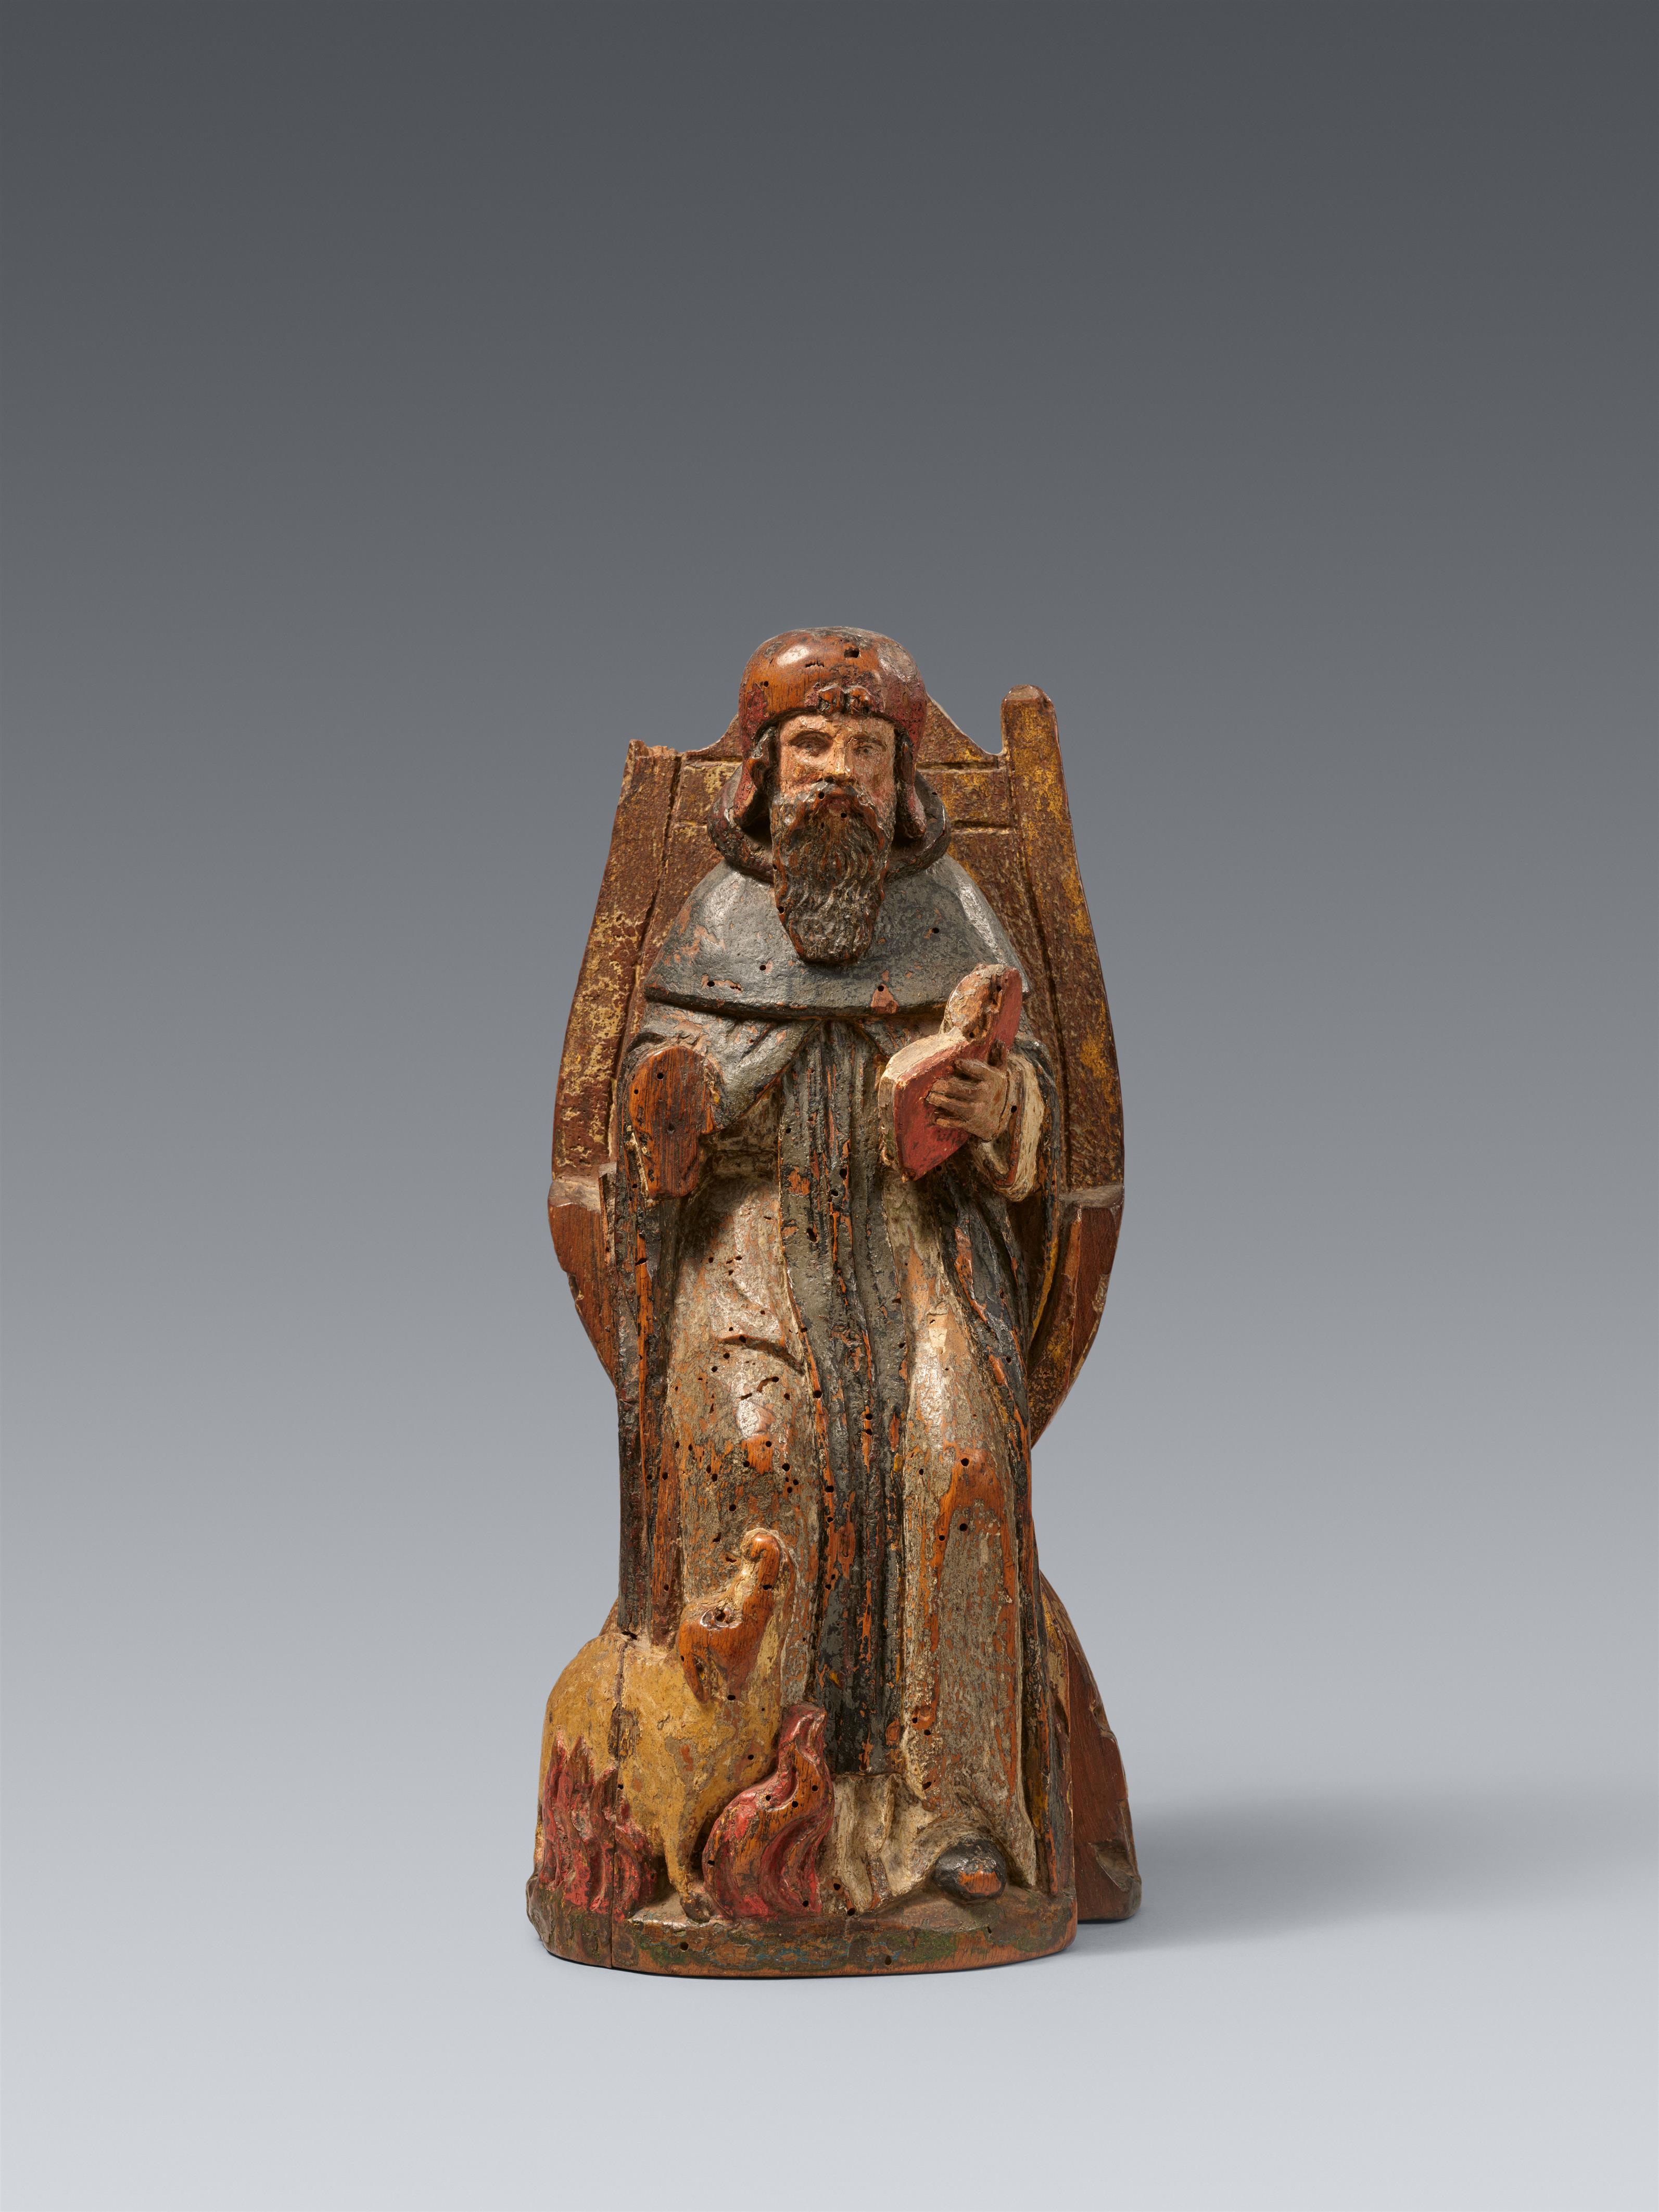 Probably West Germany 2nd half 15th century - A carved wooden figure of Saint Anthony, probably West German, second half 15th century - image-2